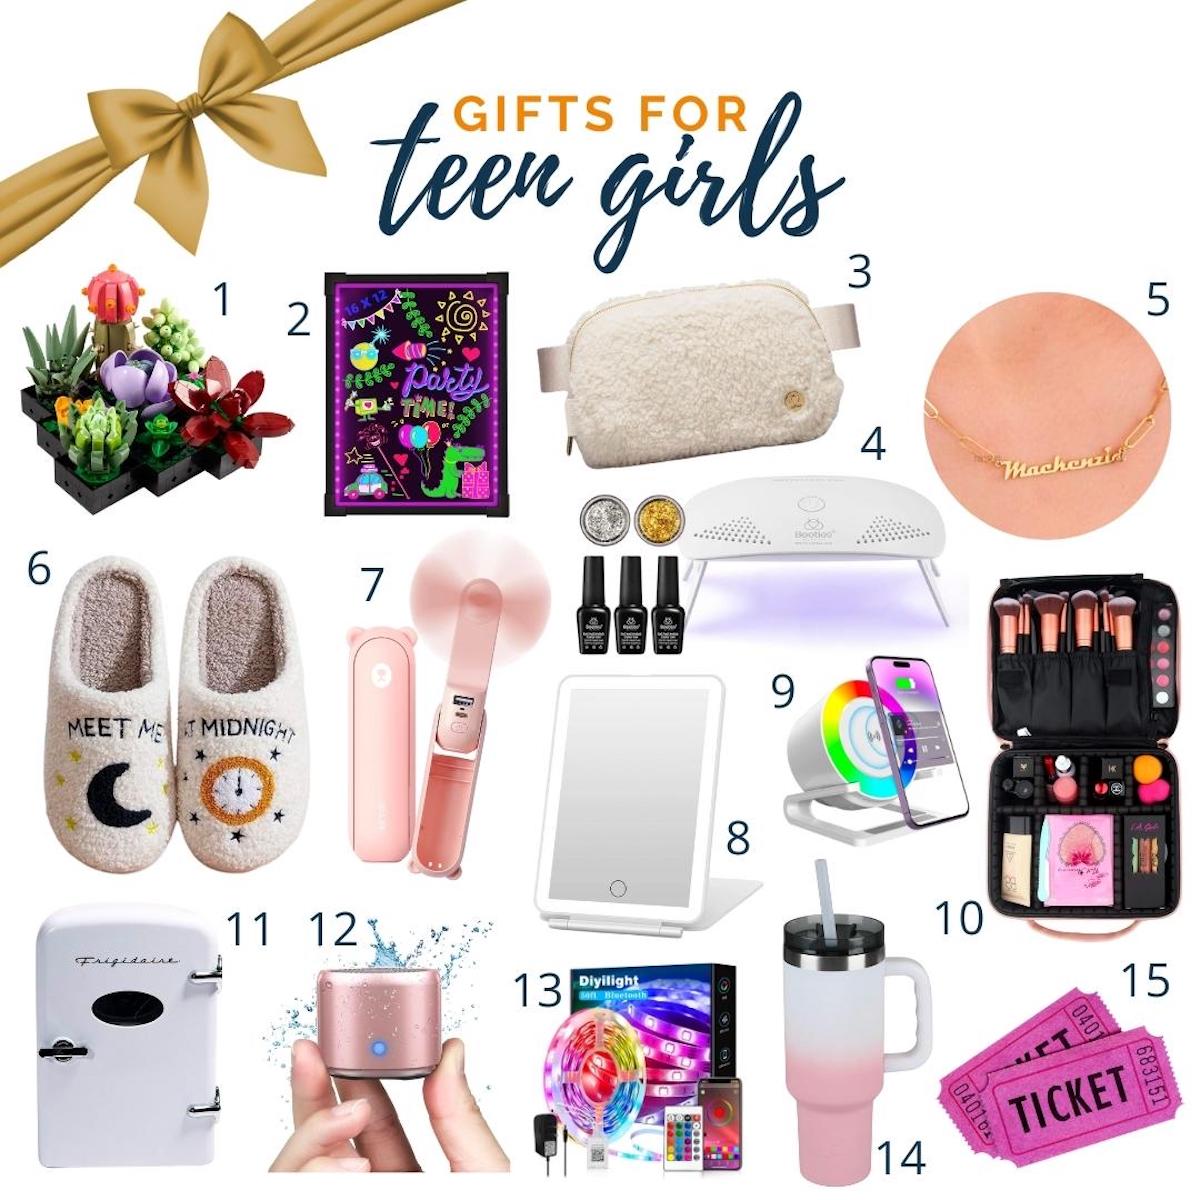 2022 Holiday Gift Guide: Fashion & Design Trends